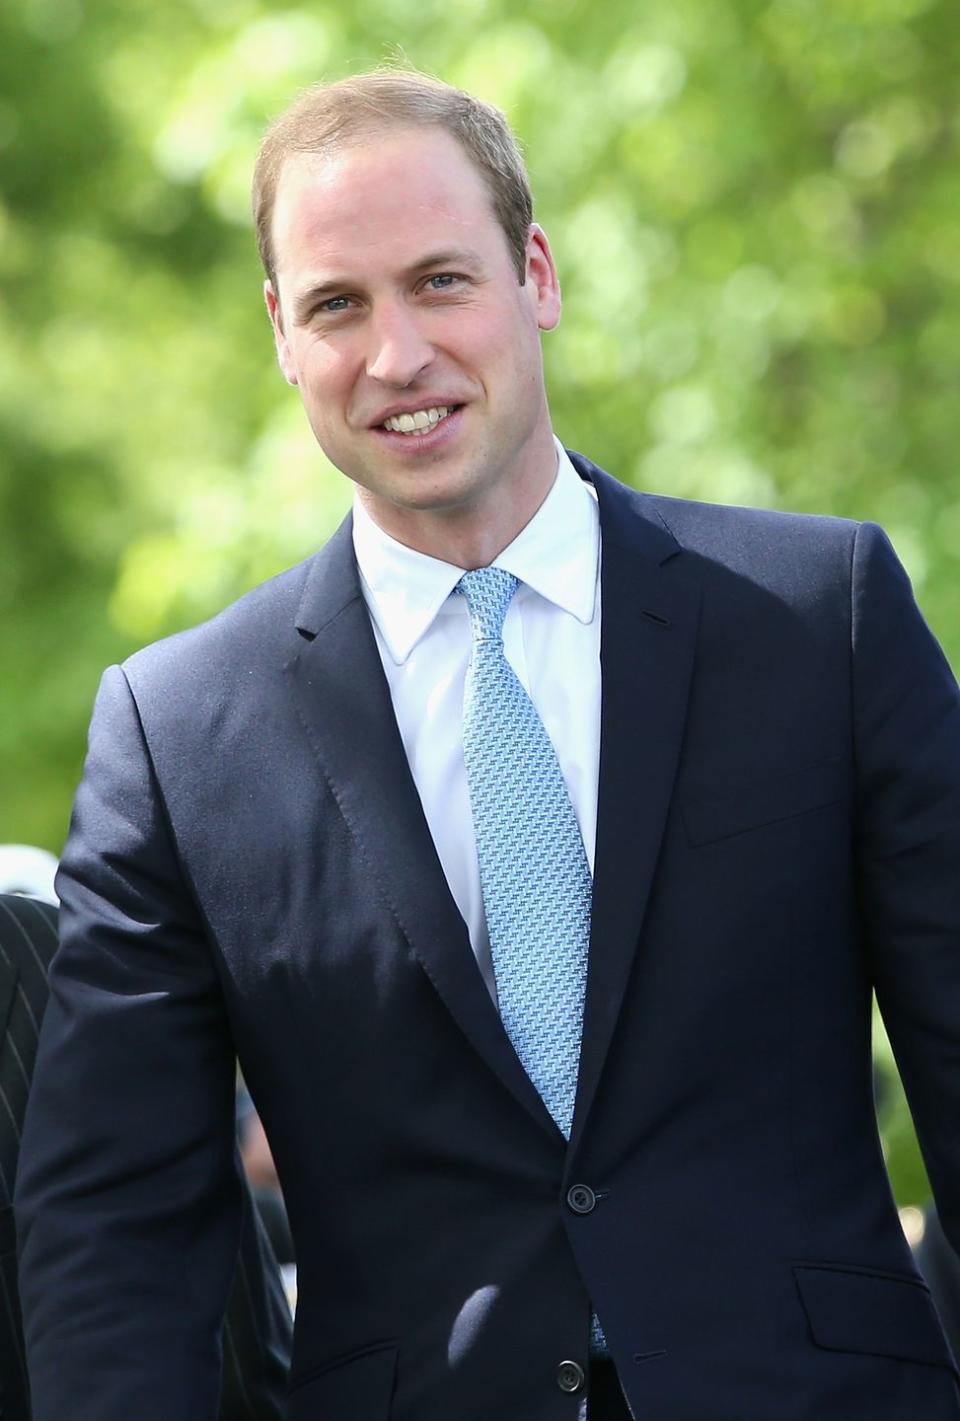 <p>The Duke of Cambridge will succeed the throne after his father, Prince Charles.</p>